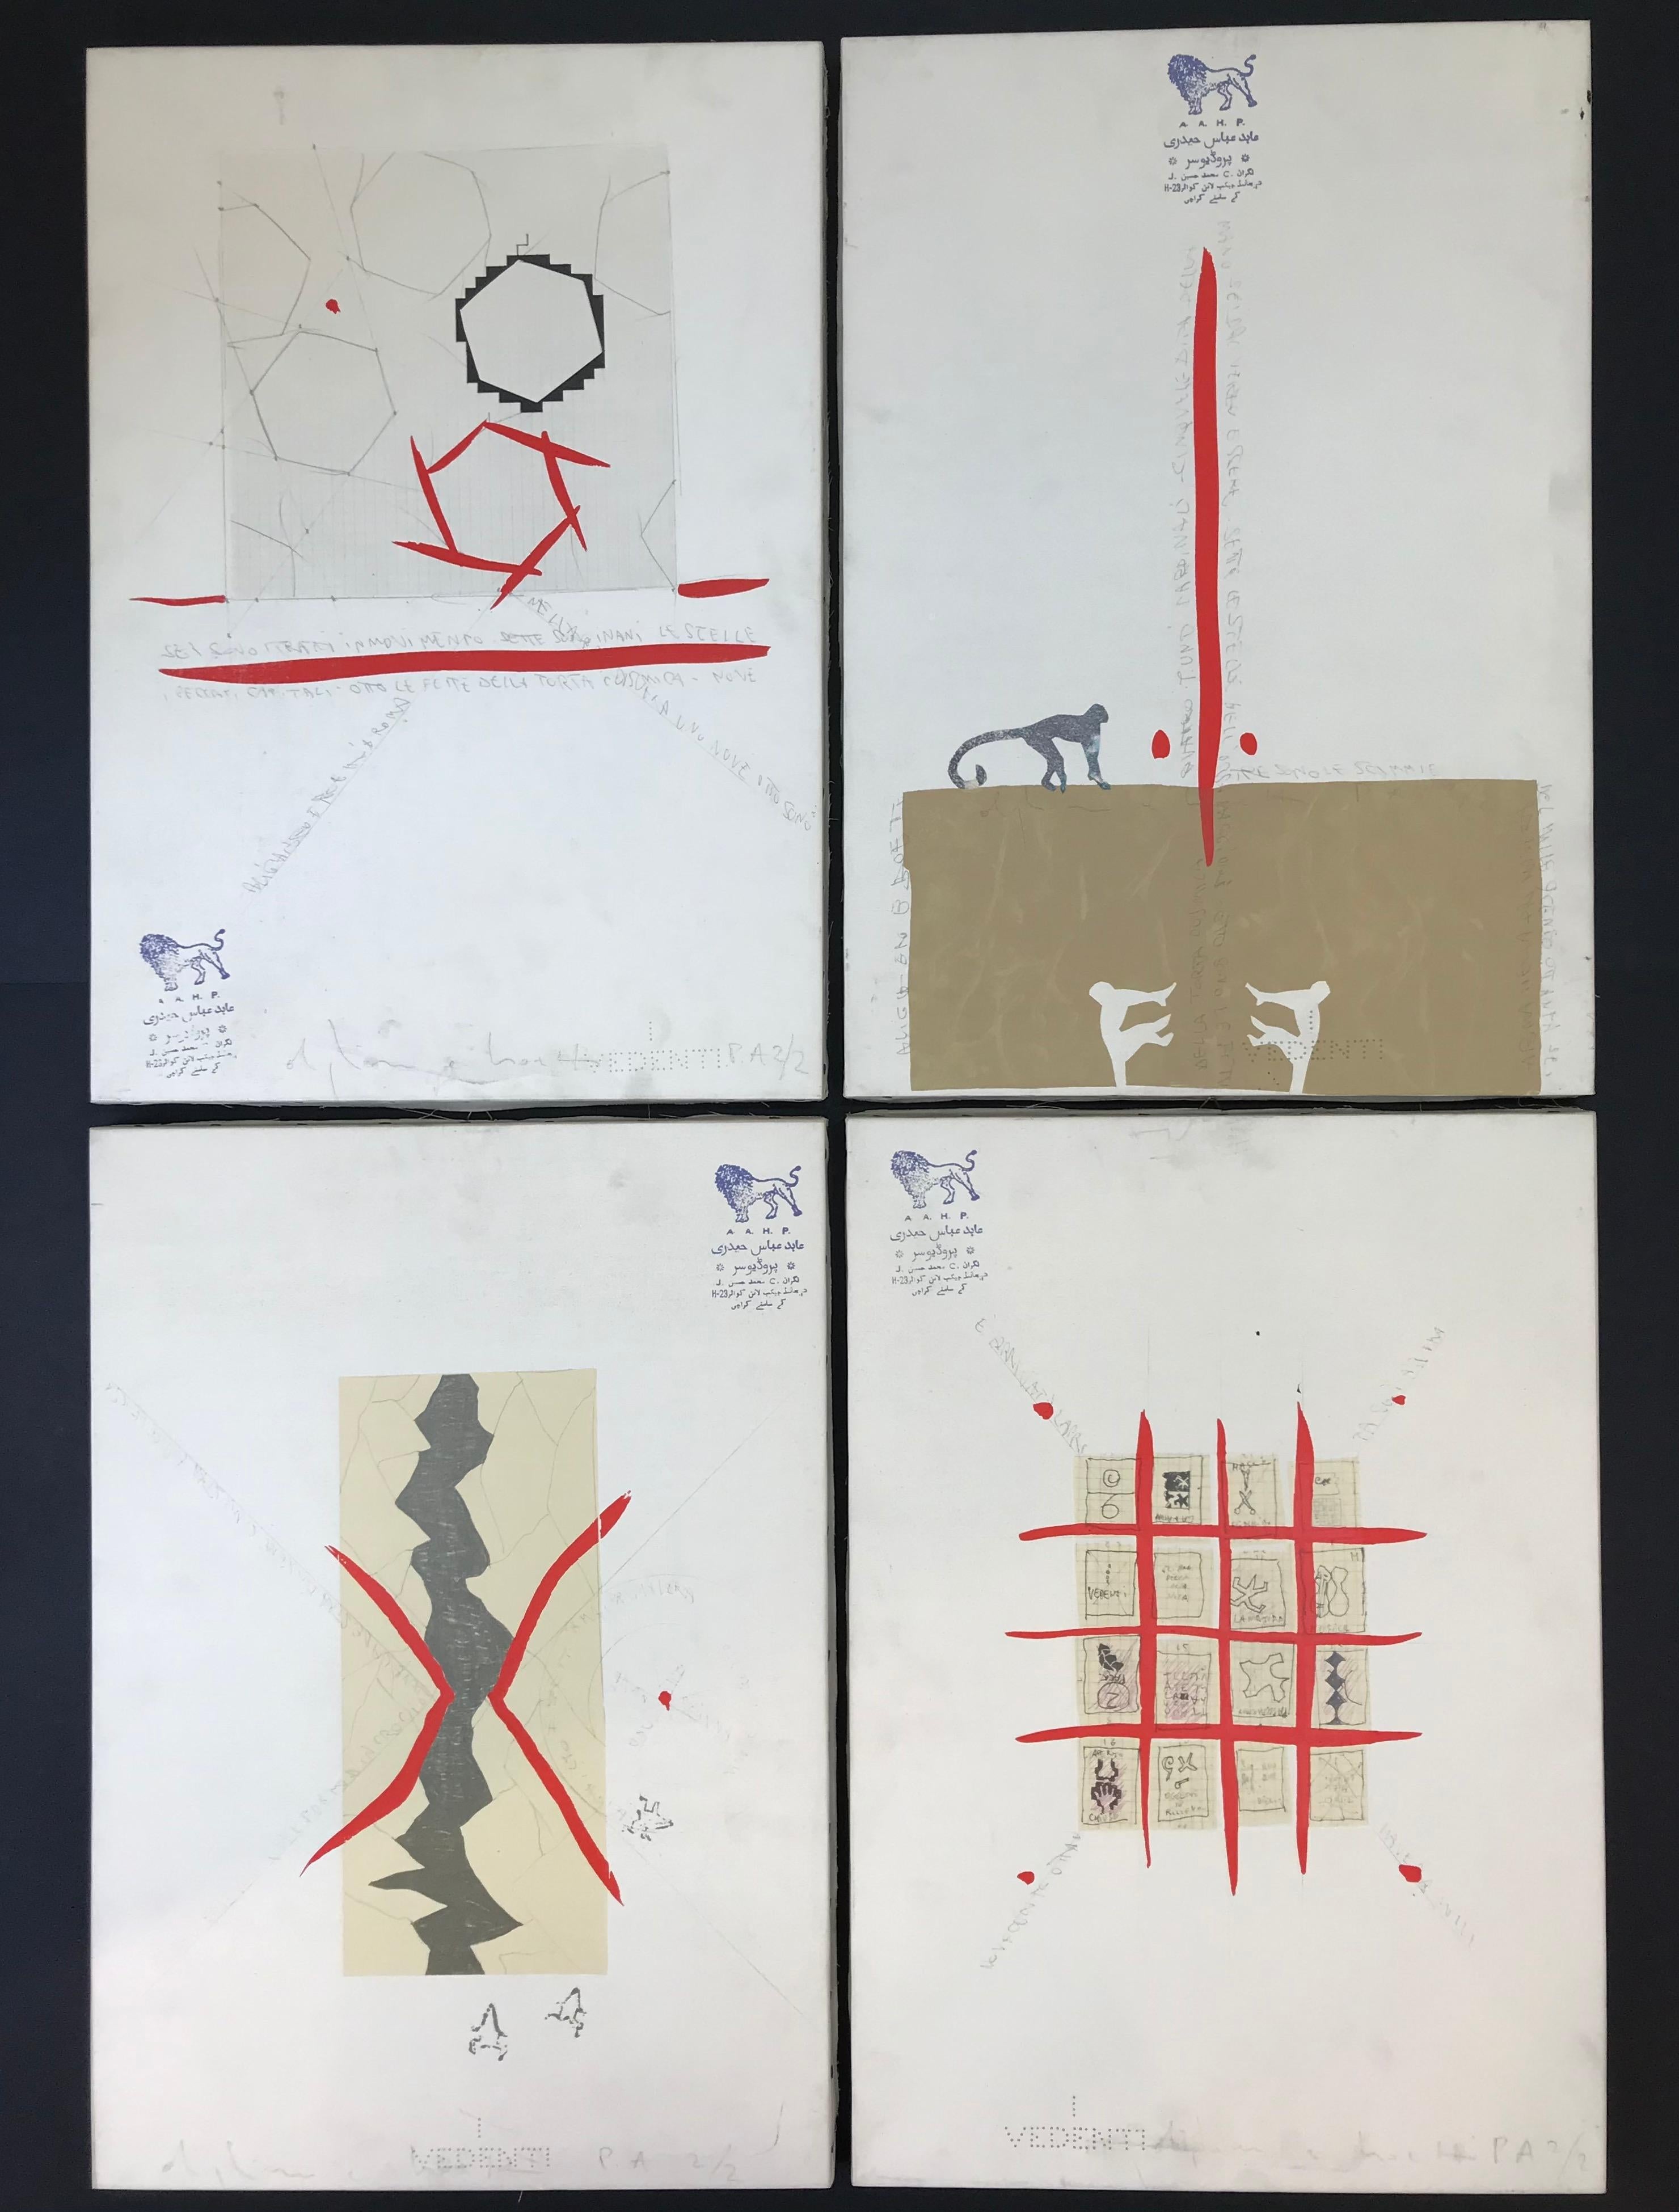 4 lithographic screen printing on canvas ( complete folder ), edited in 1988
limited edition of 100 copies and 2 PA ( artist proofs )
each work numbered as: PA 2/2
each work: H 50 x L 35 cm (19,68 x 13,77 in )
very good conditions
the works are part